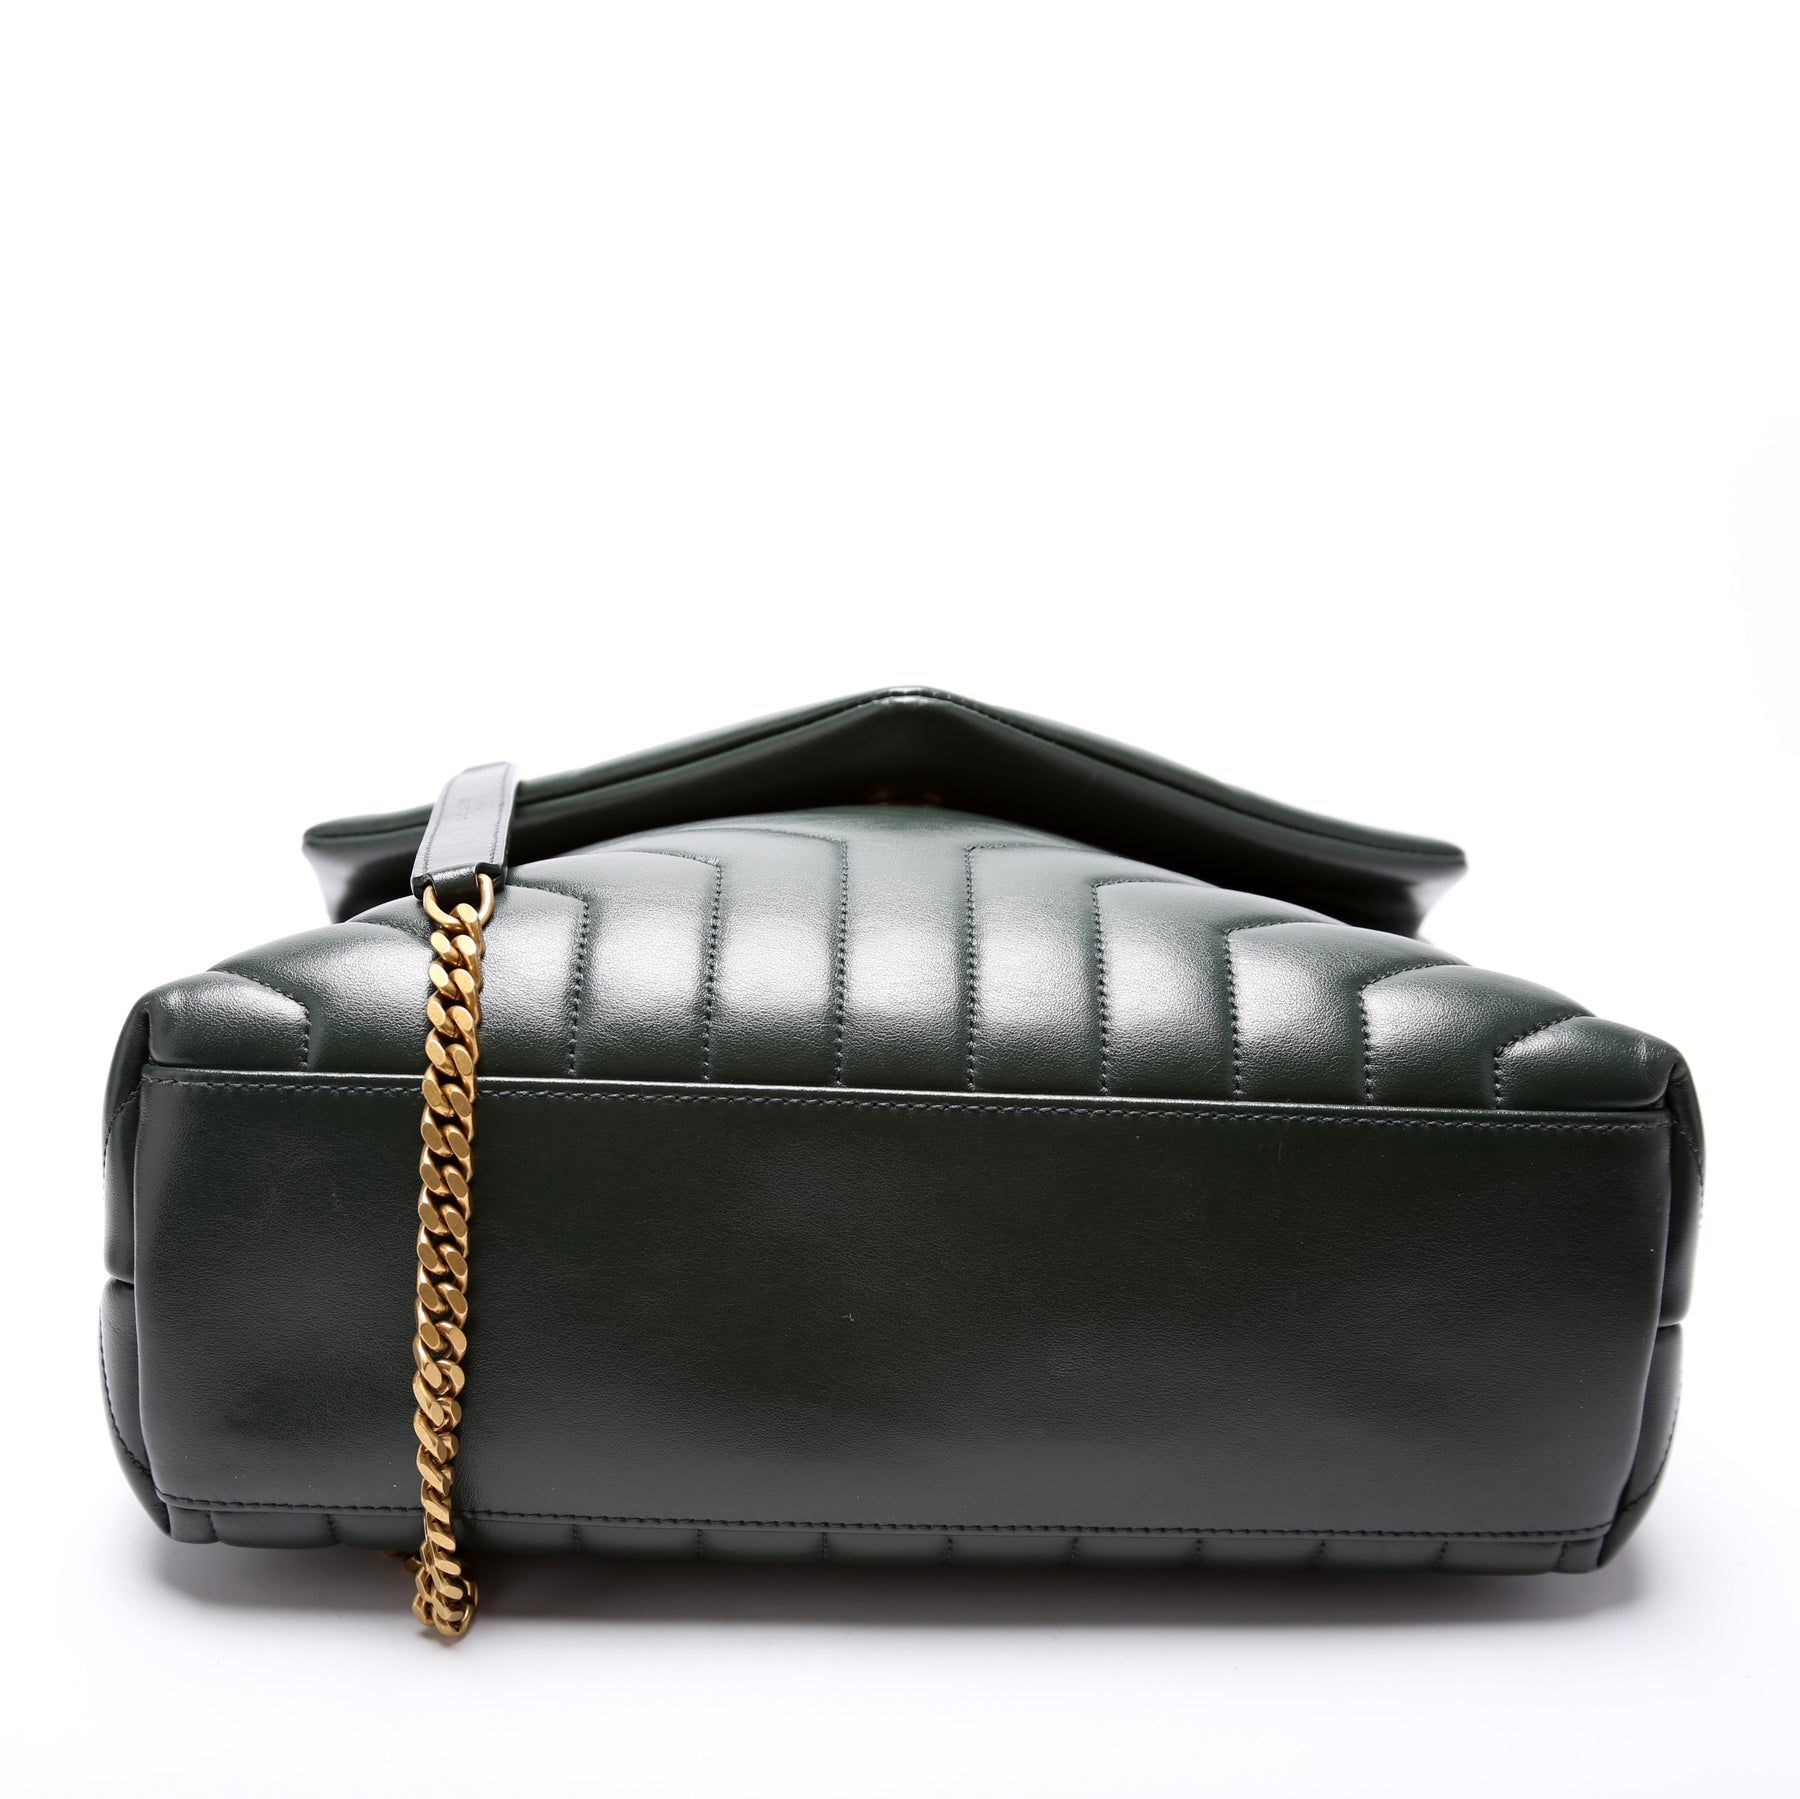 Quick Tips to Authenticate the Saint Laurent Loulou Satchel - Academy by  FASHIONPHILE